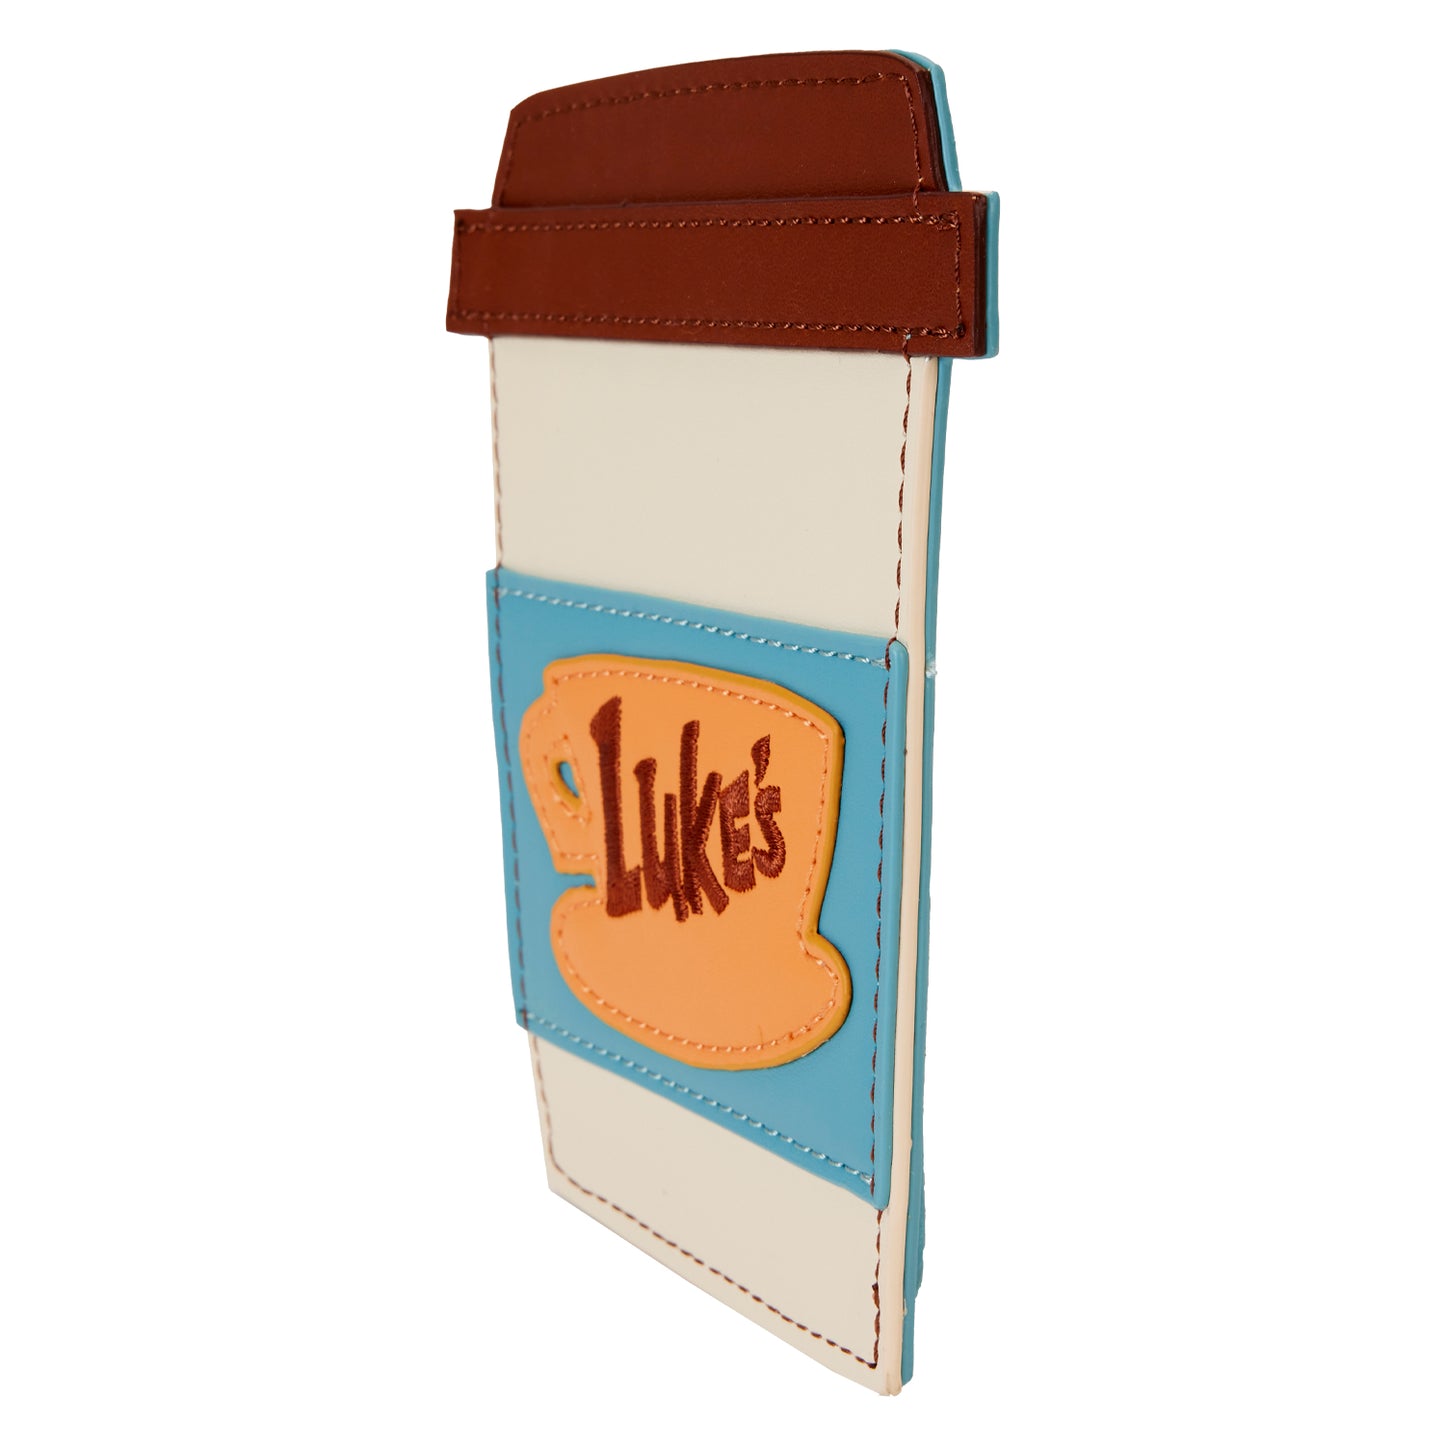 Gilmore Girls Luke's Diner To-Go Coffee Cup Card Holder *PRE-ORDER ITEM*